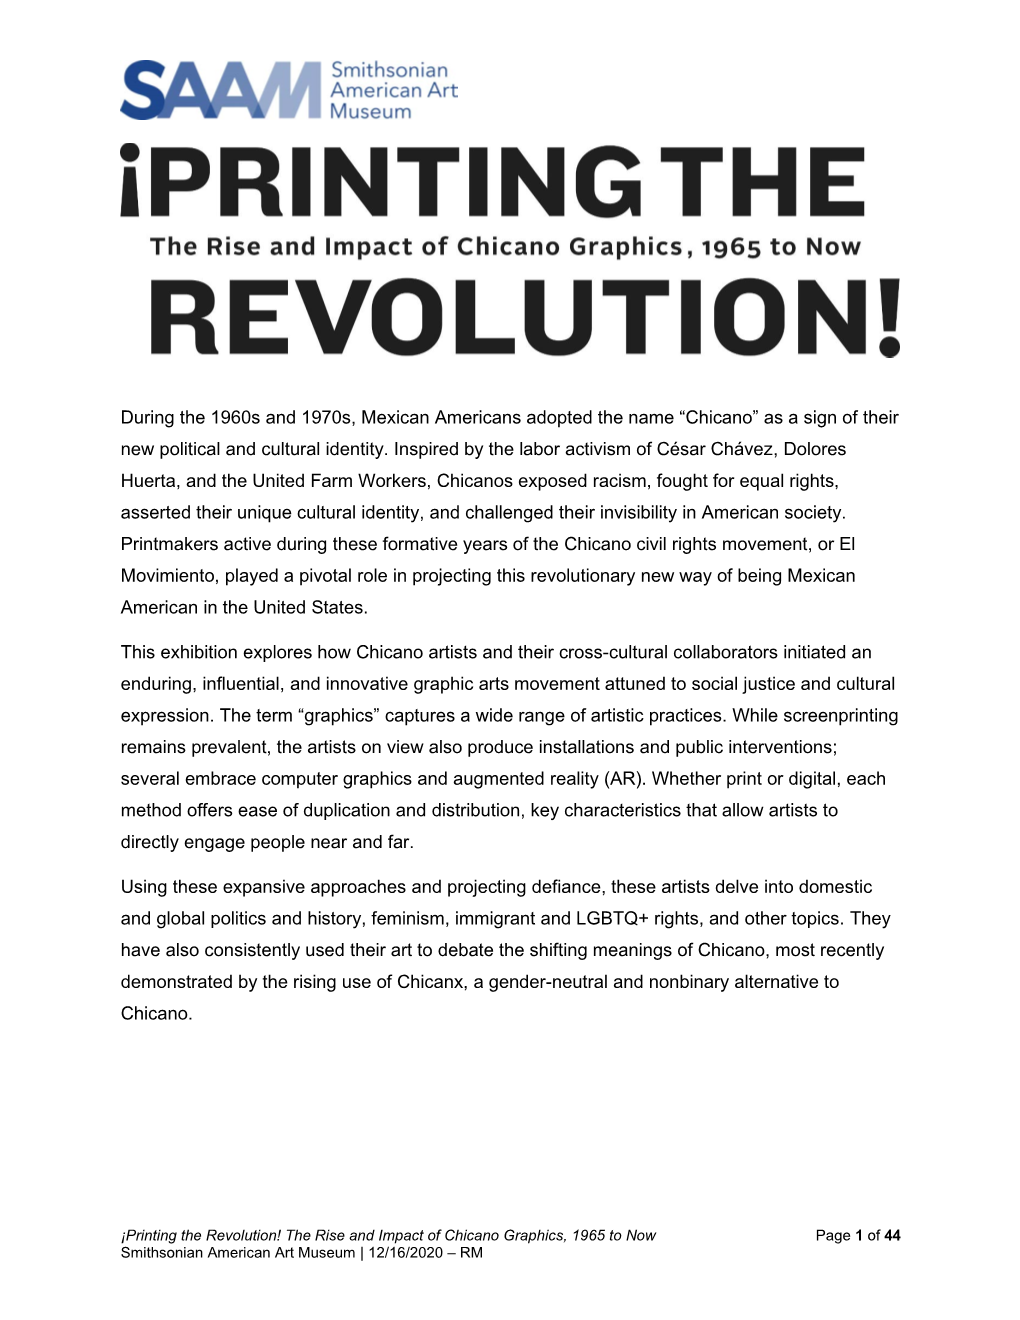 Printing the Revolution Exhibition Wall Text (English) | Smithsonian American Art Museum